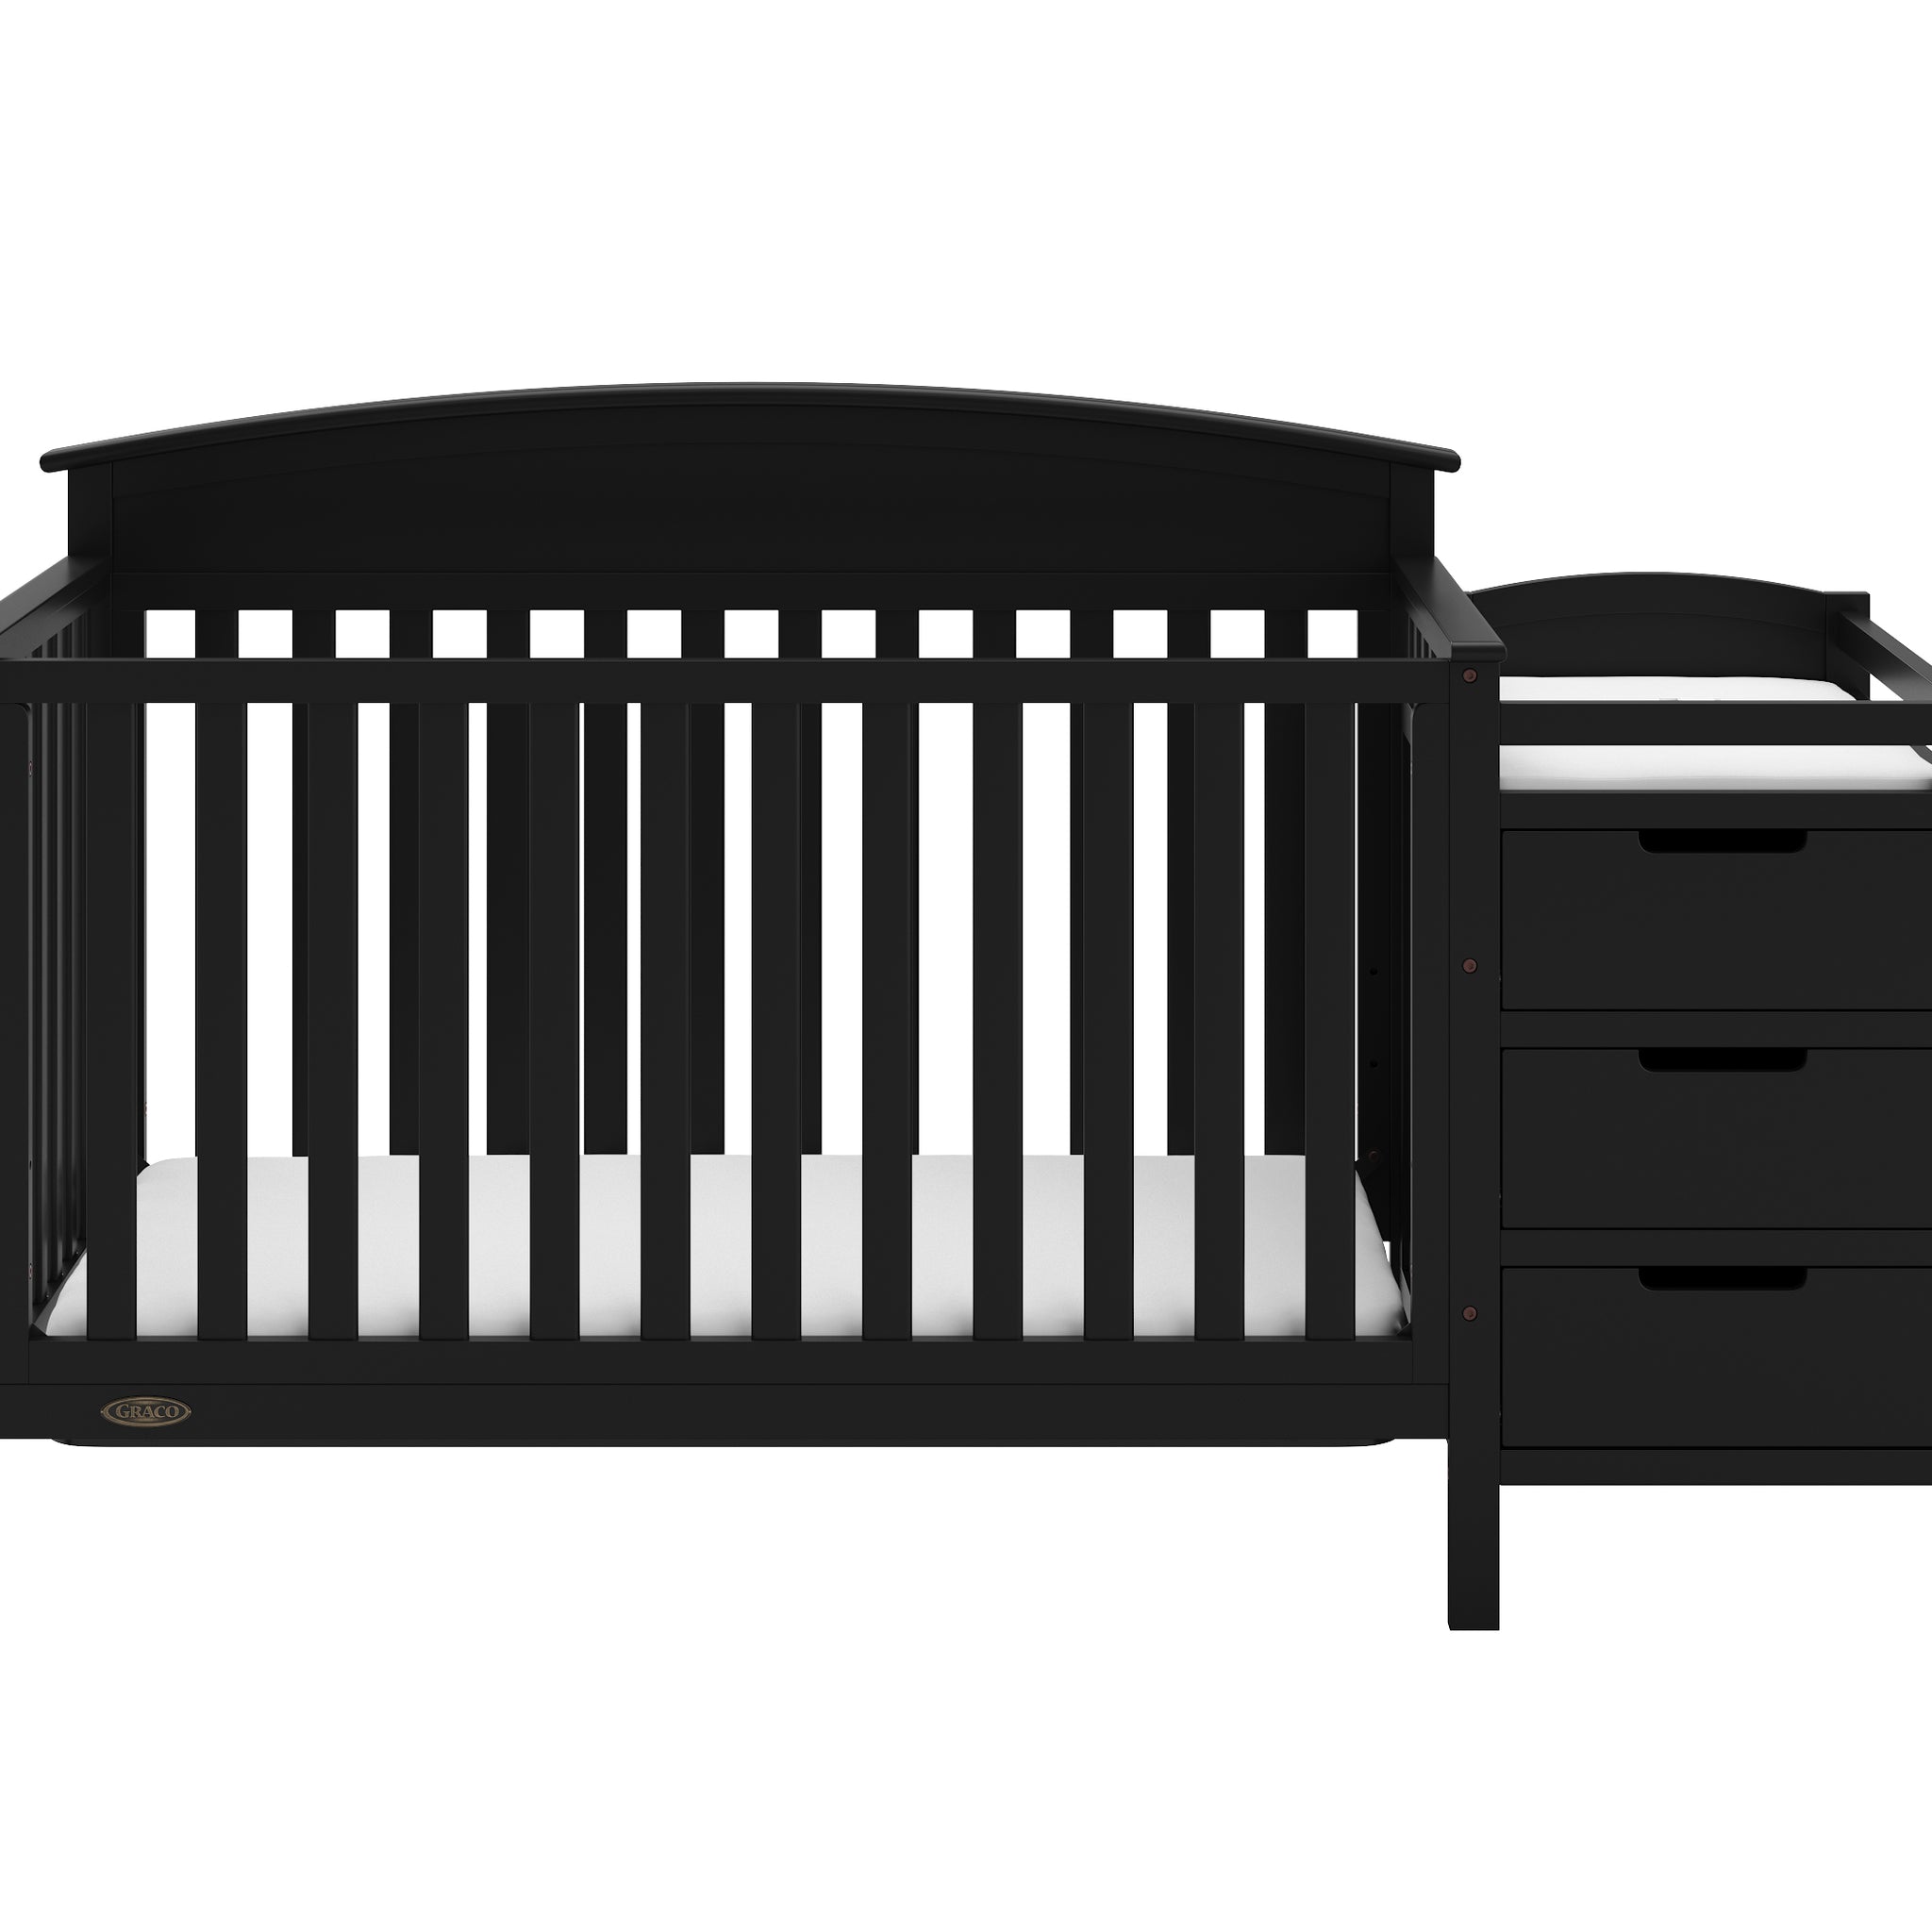 Close-up view of black crib and changer